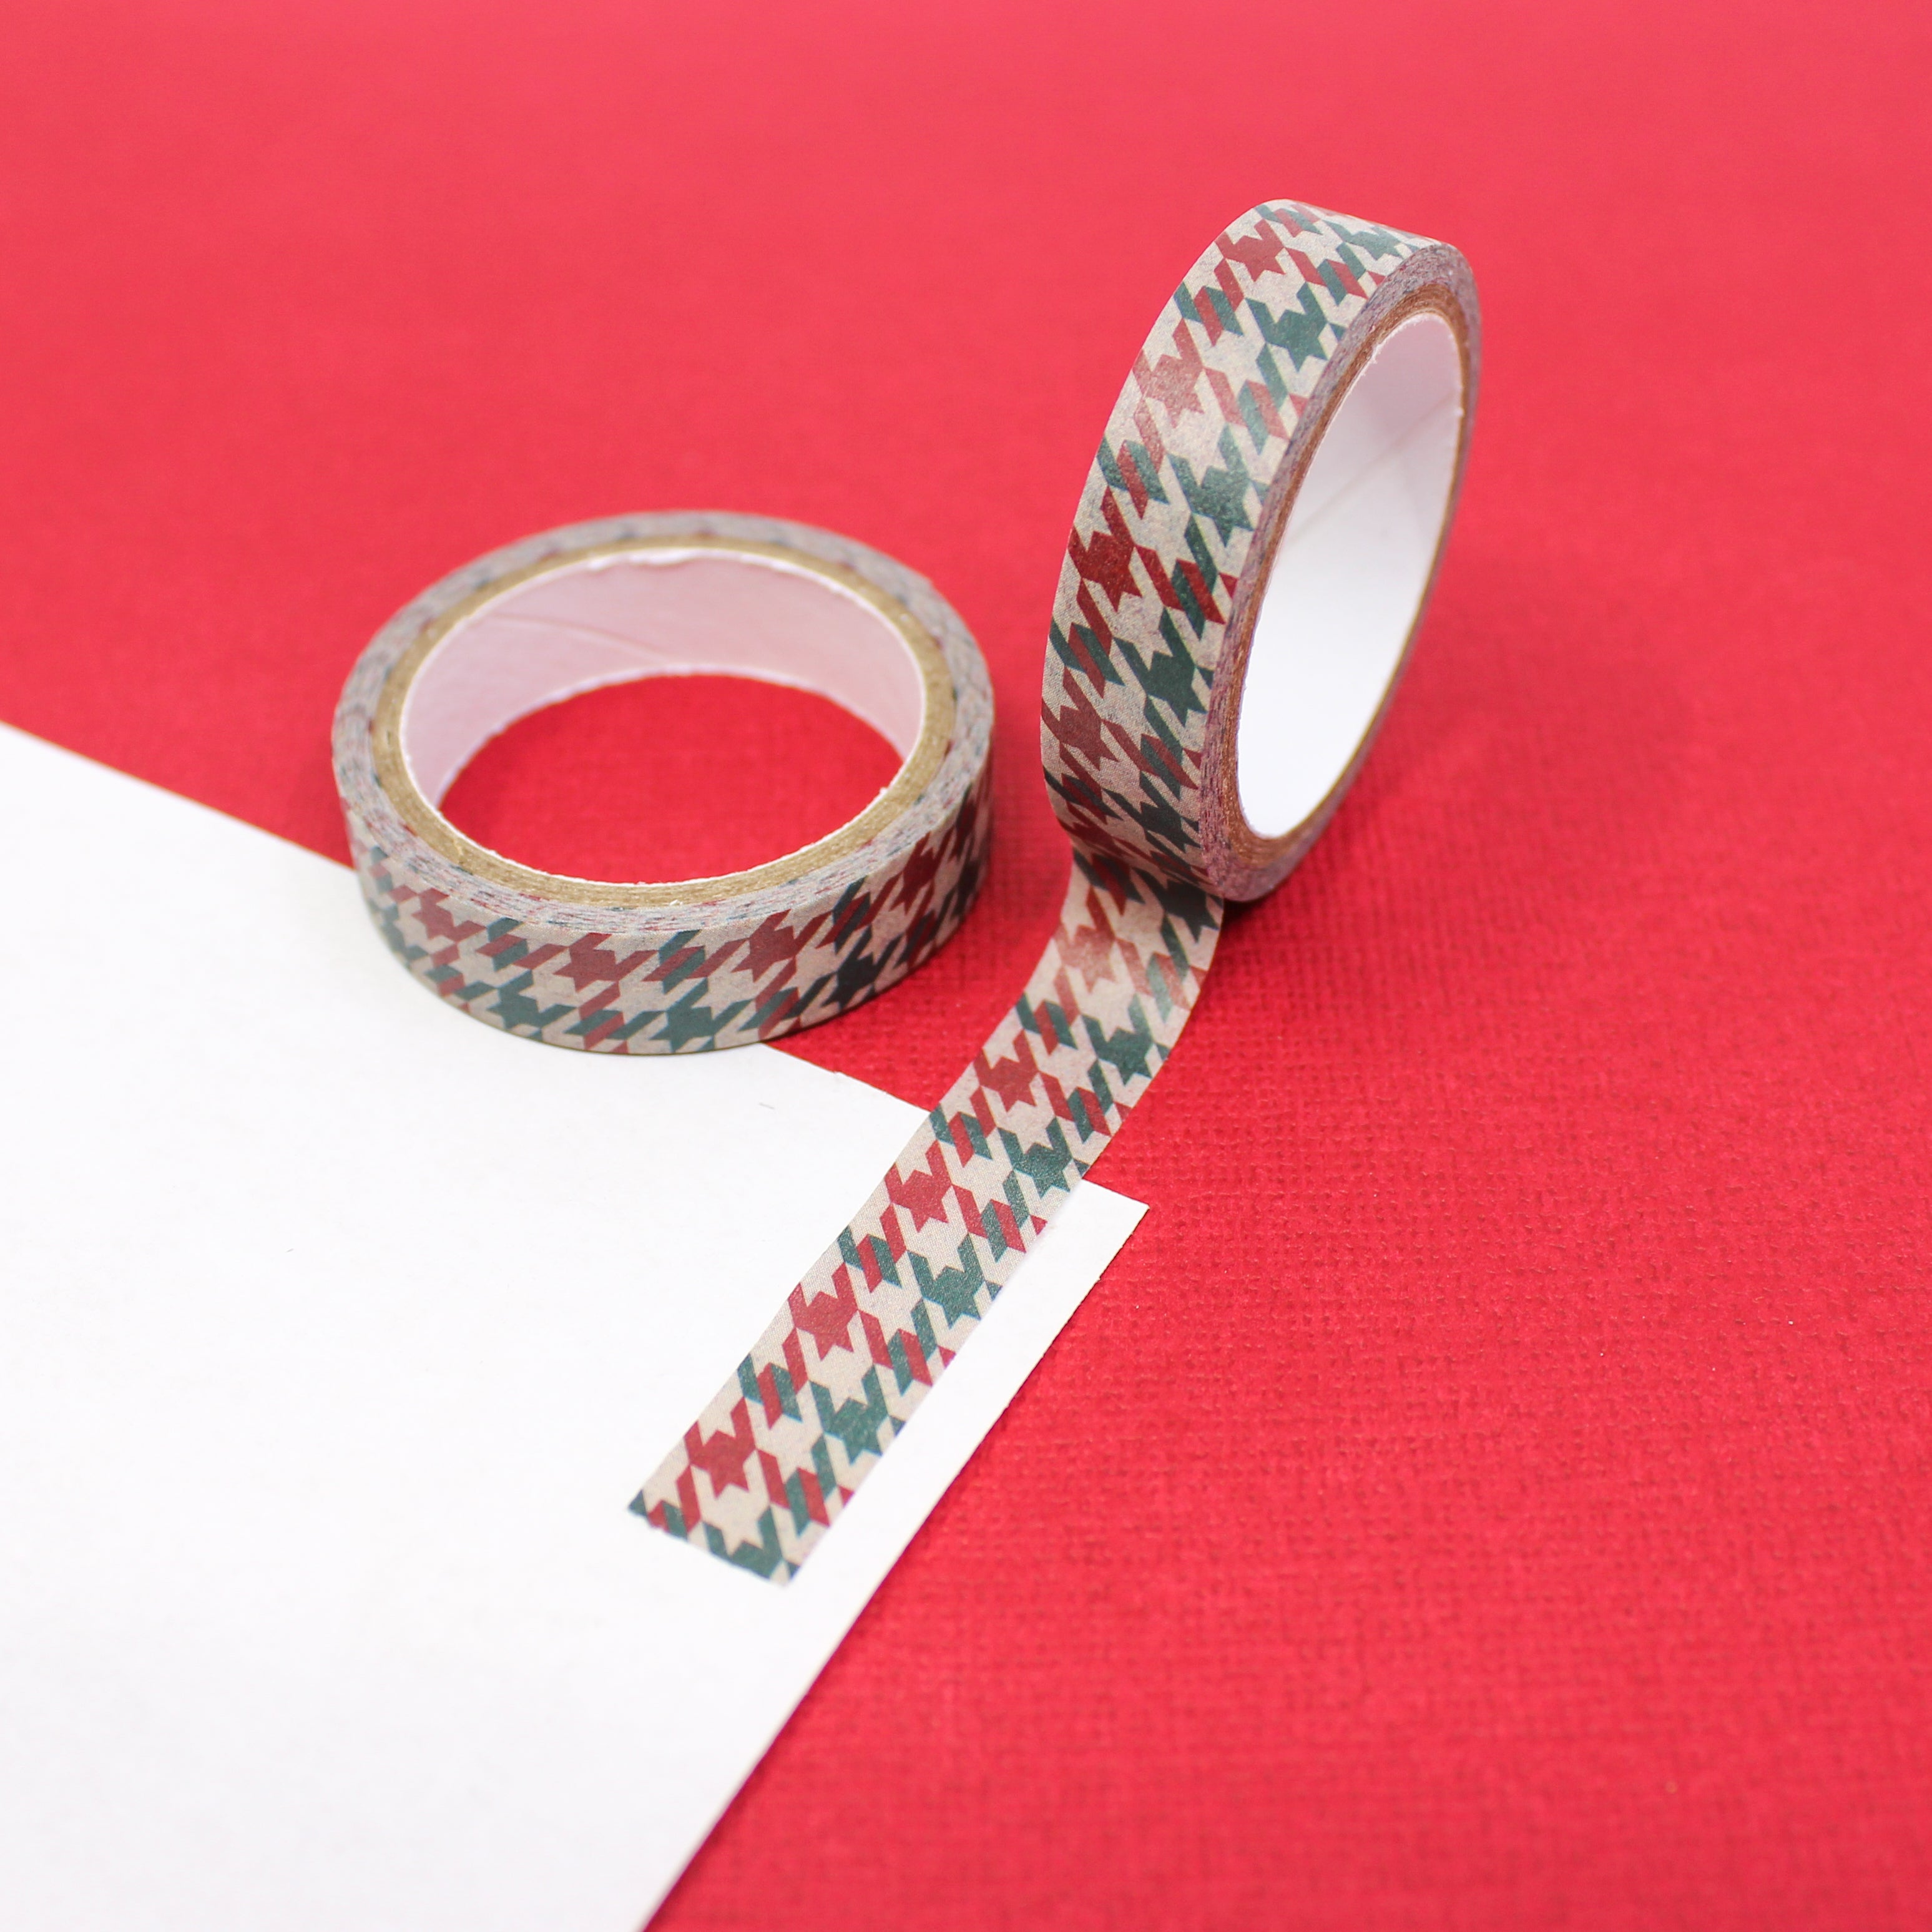 Infuse your creations with the elegance of the season using our washi tape adorned with Christmas houndstooth patterns, capturing the sophistication and charm of holiday fashion. This tape is sold at BBB Supplies Craft Shop.